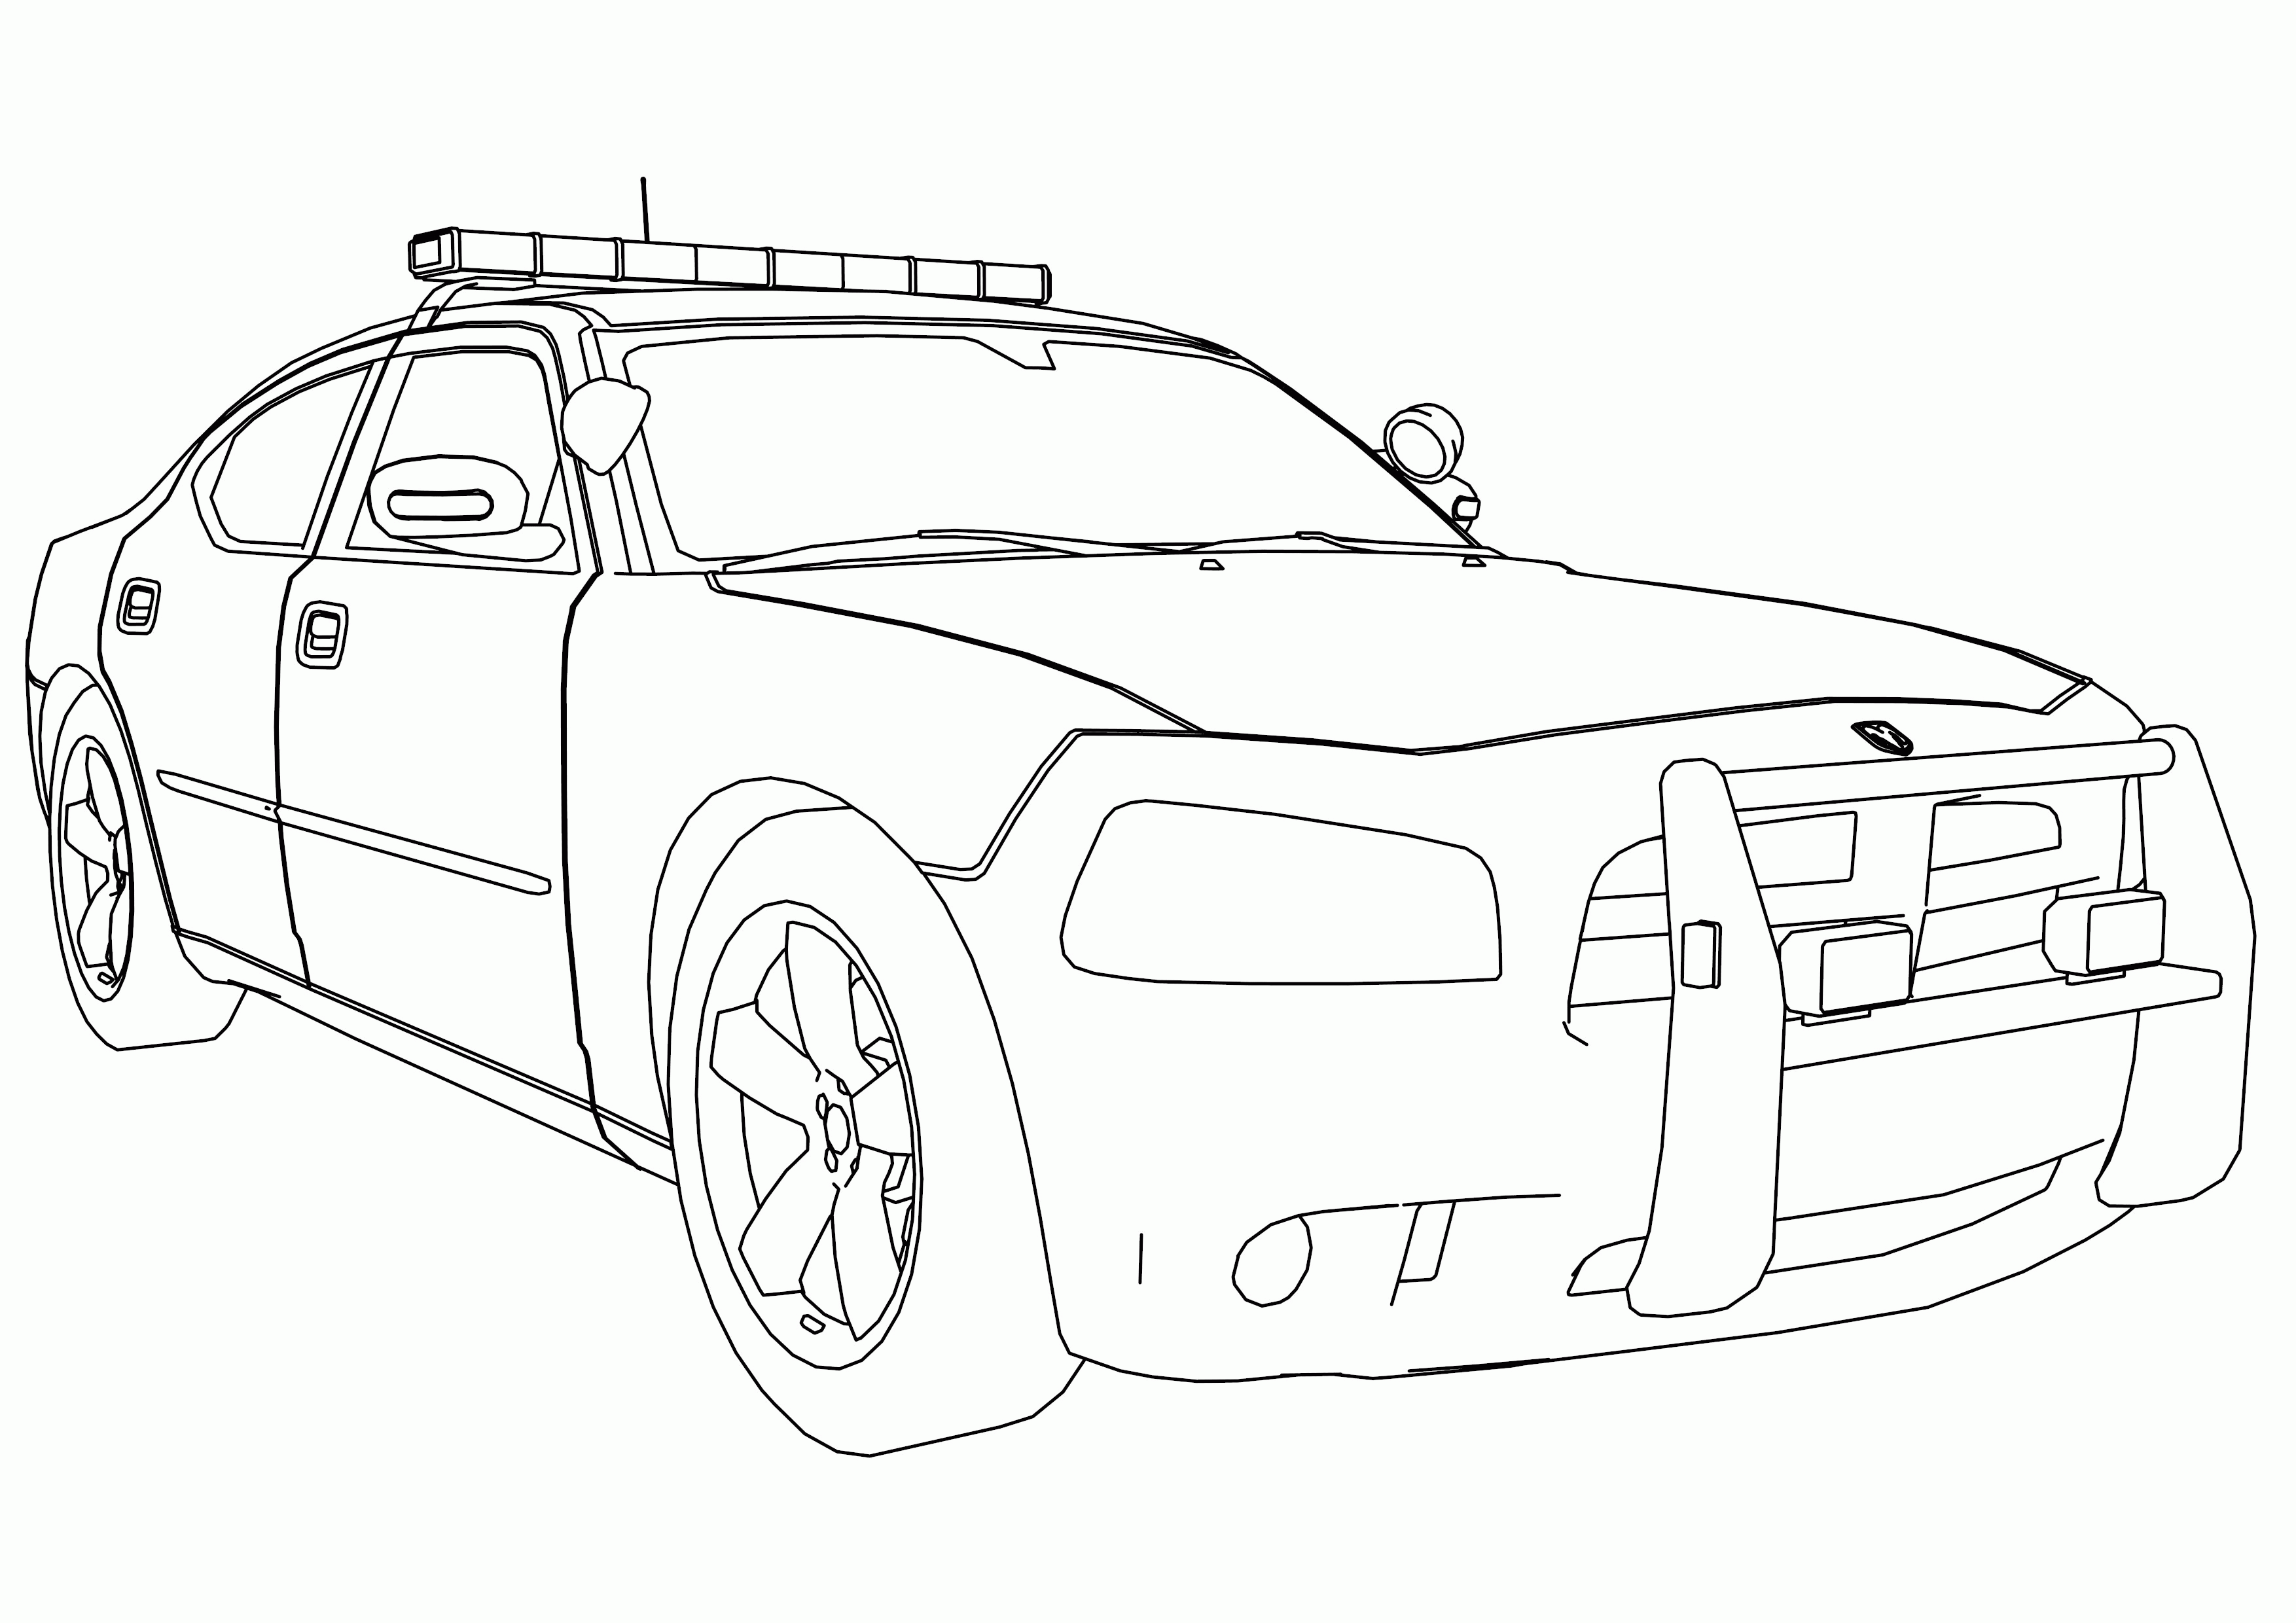 Charger - Coloring Pages for Kids and for Adults